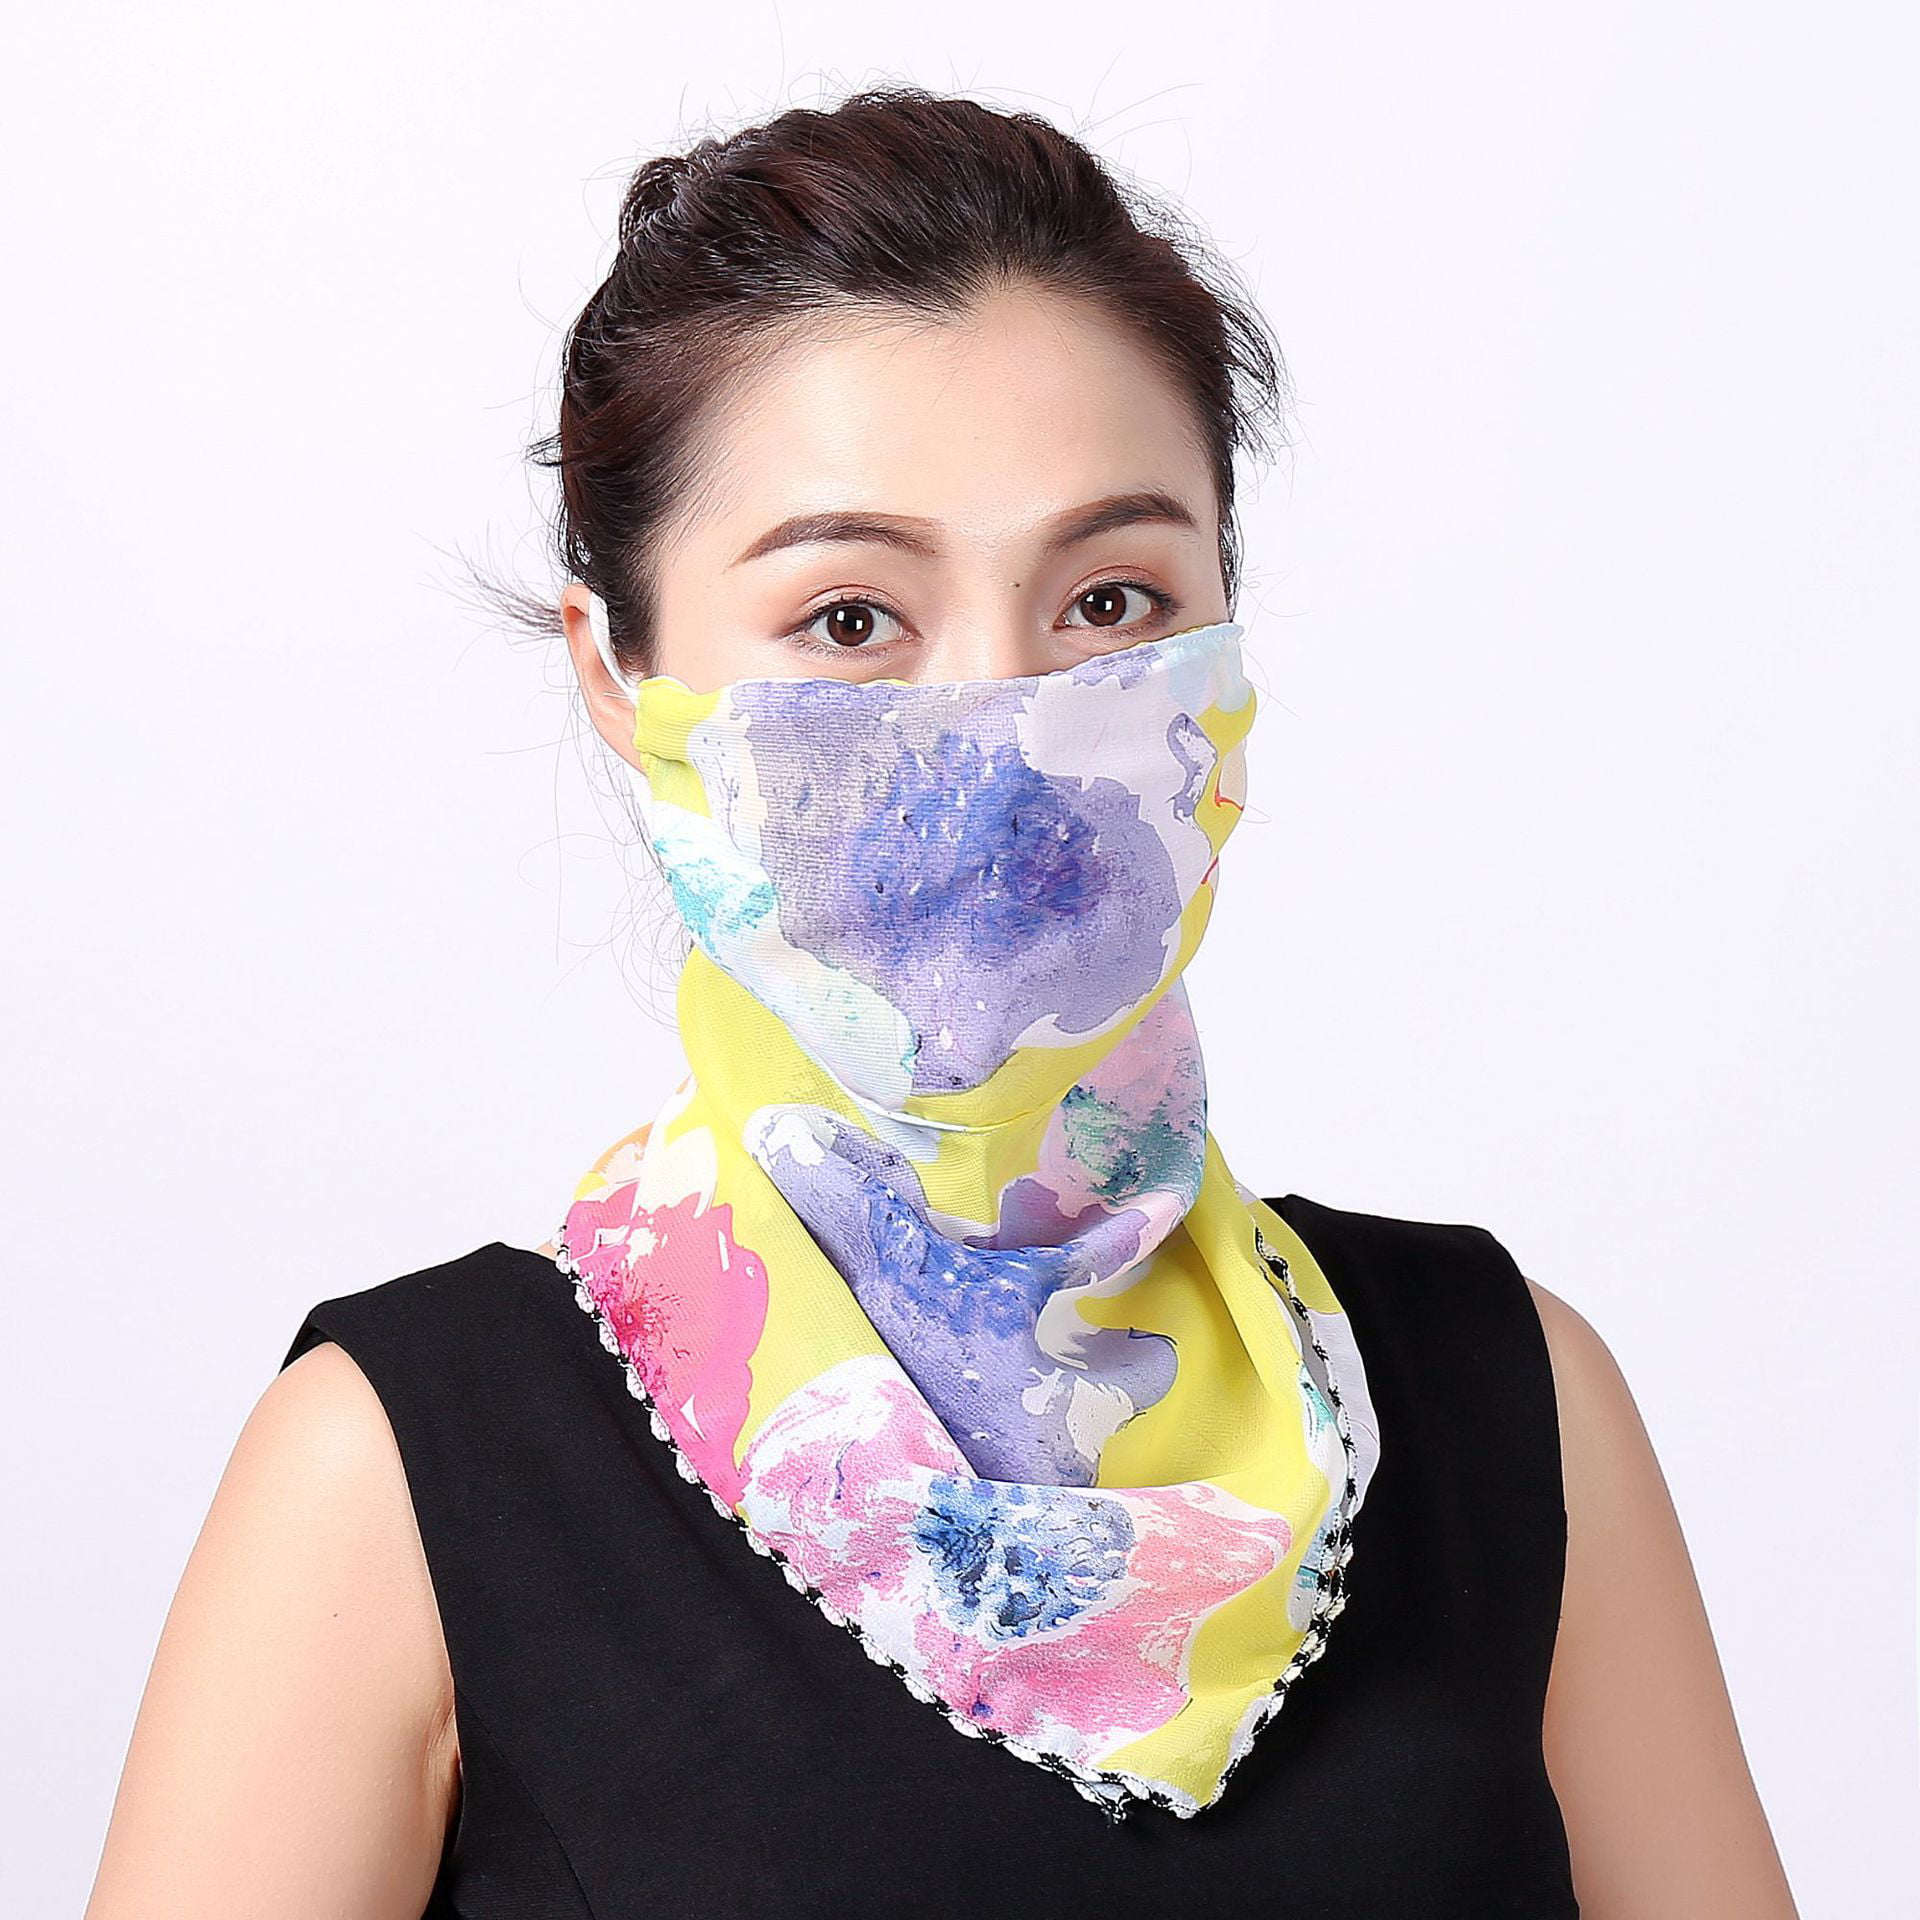 Tough Headwear Microfibre Dust Protection Masks Black Tube Scarf Tube Scarf Neck Scarf Bandana Multifunctional Cloth Mouth Mask Pack of 3 